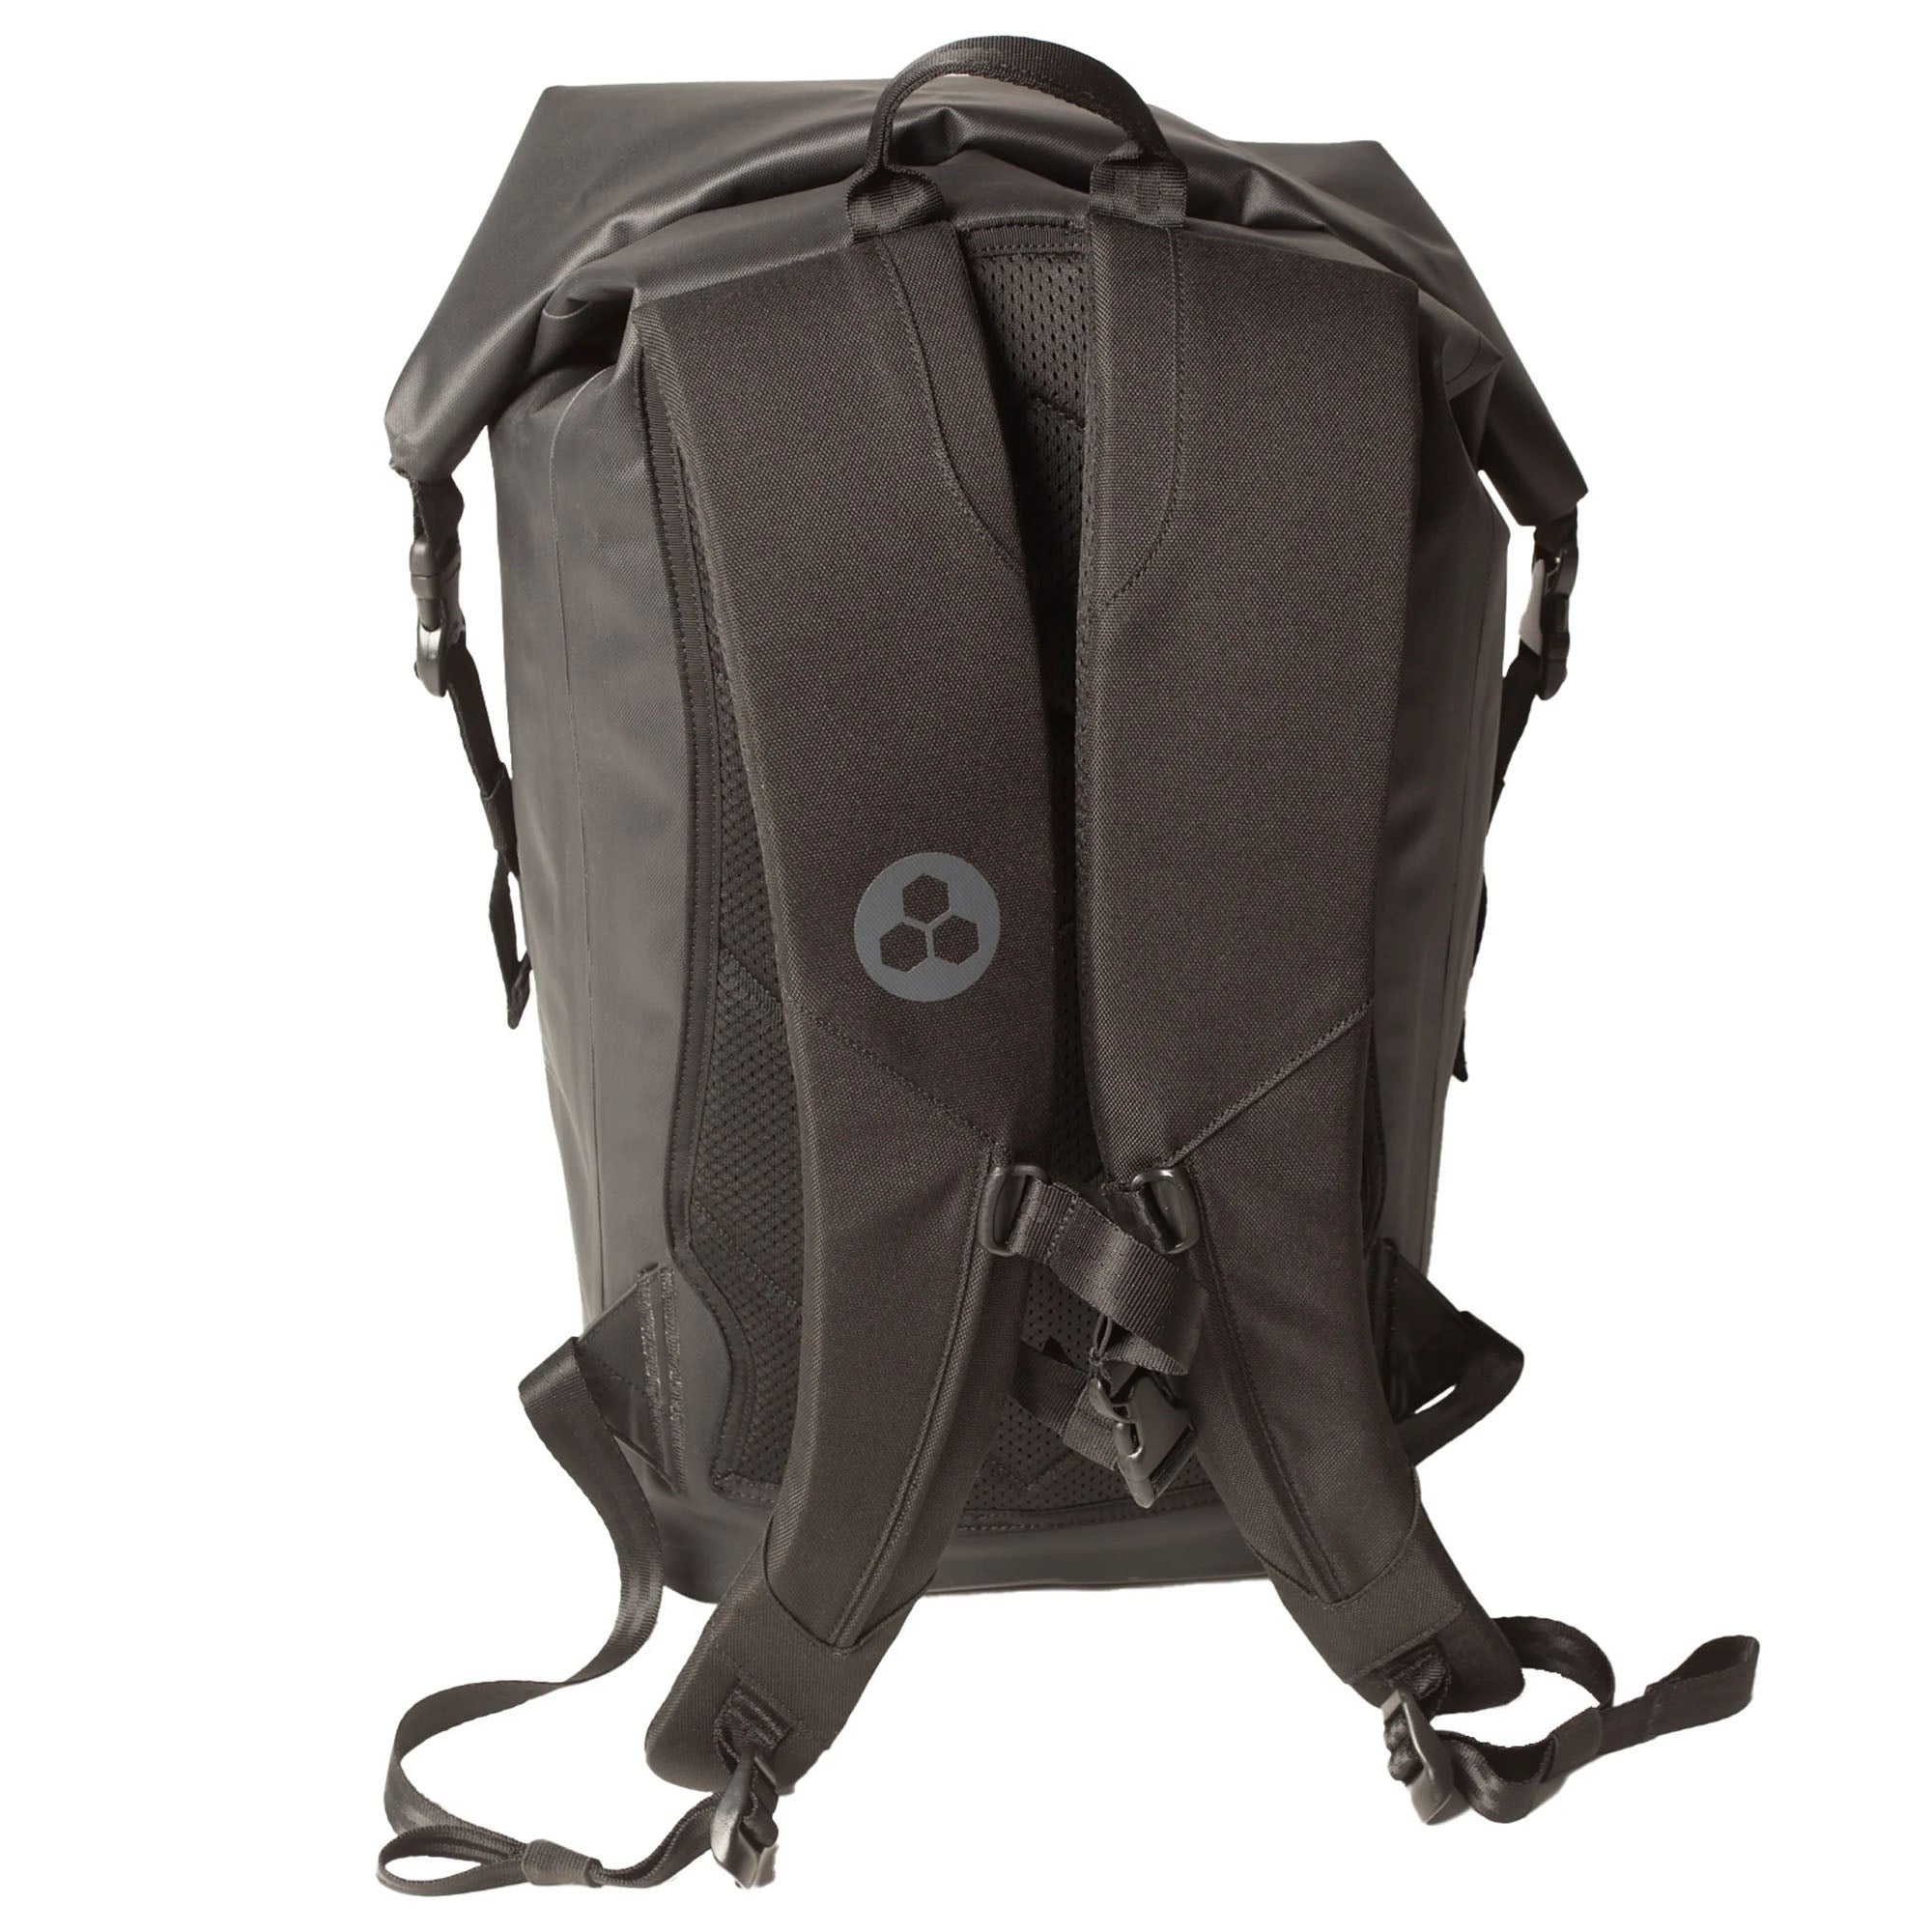 Channel Islands Dry Pack 25L Bag